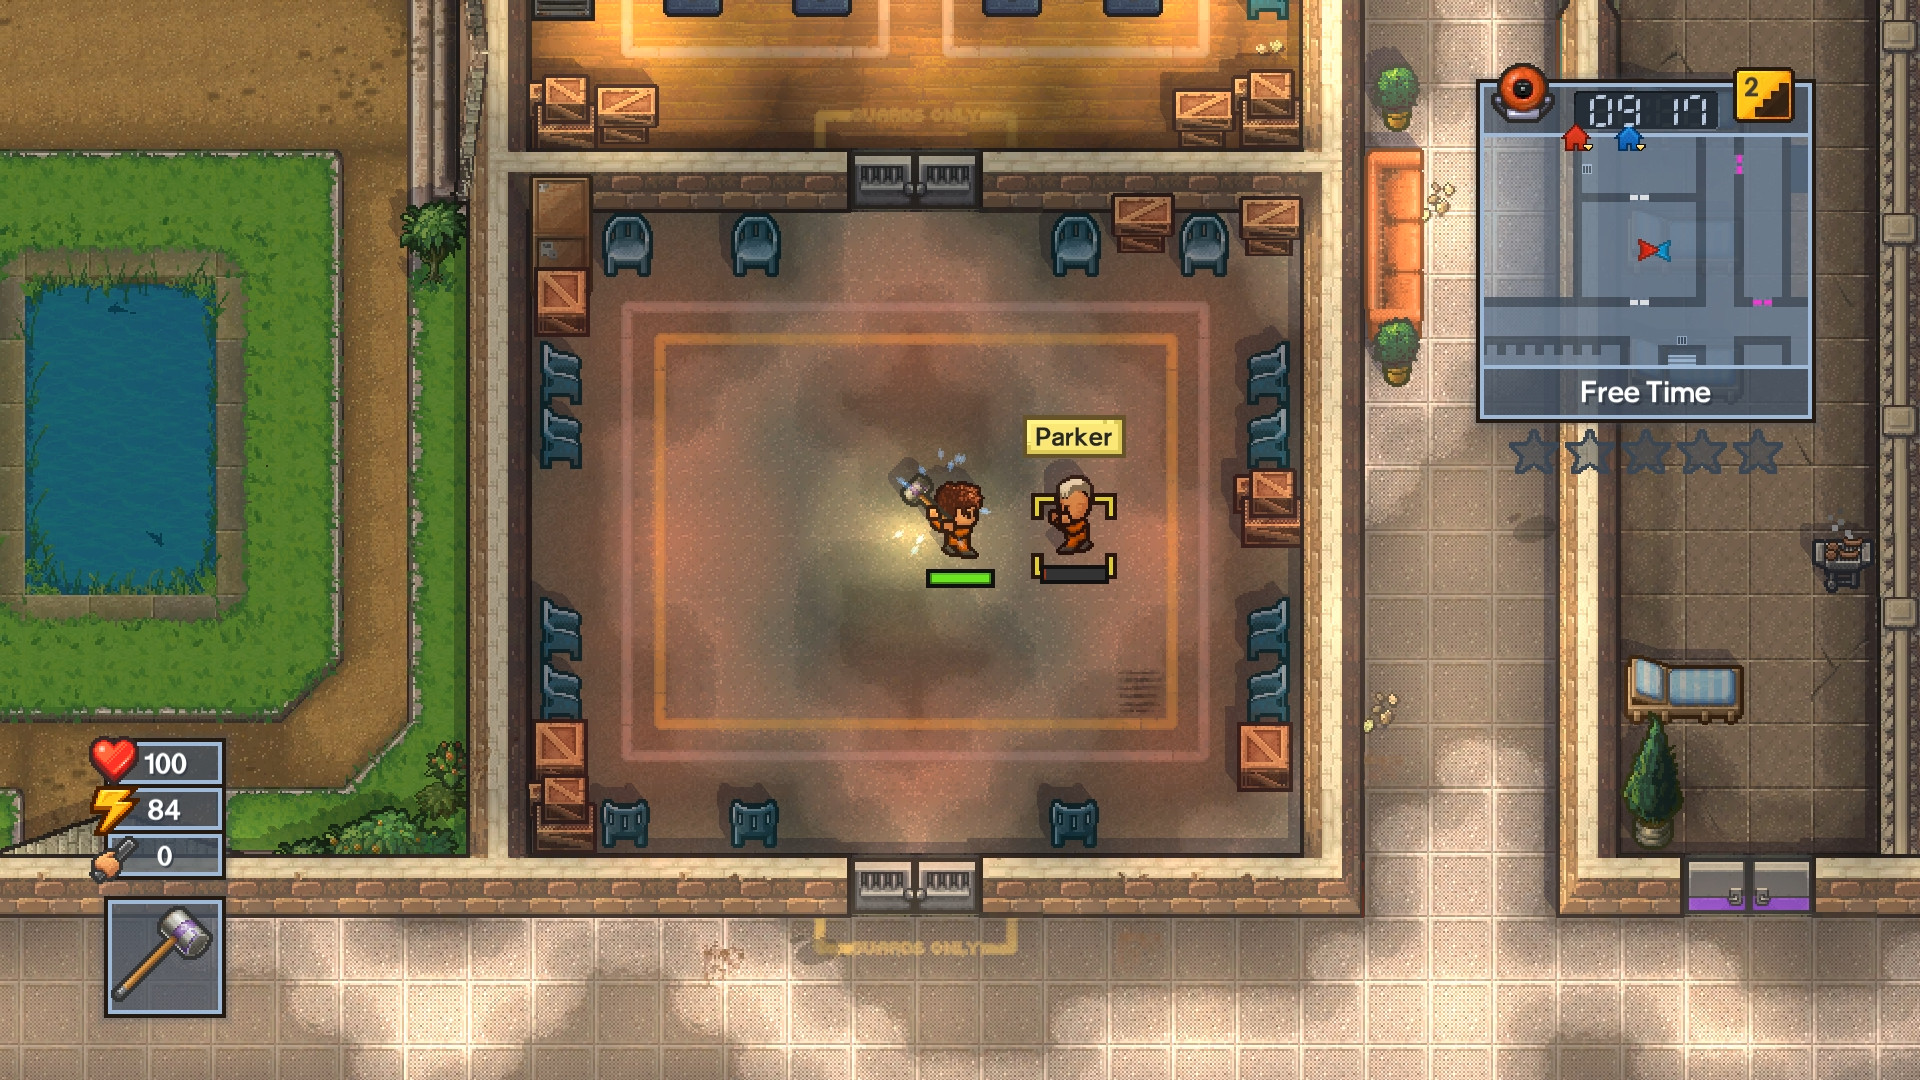 Best mobile strategy games: The Escapists 2. Image shows somebody called Parker about to be killed by a hammer. Everything is rendered in a isometric pixel style.